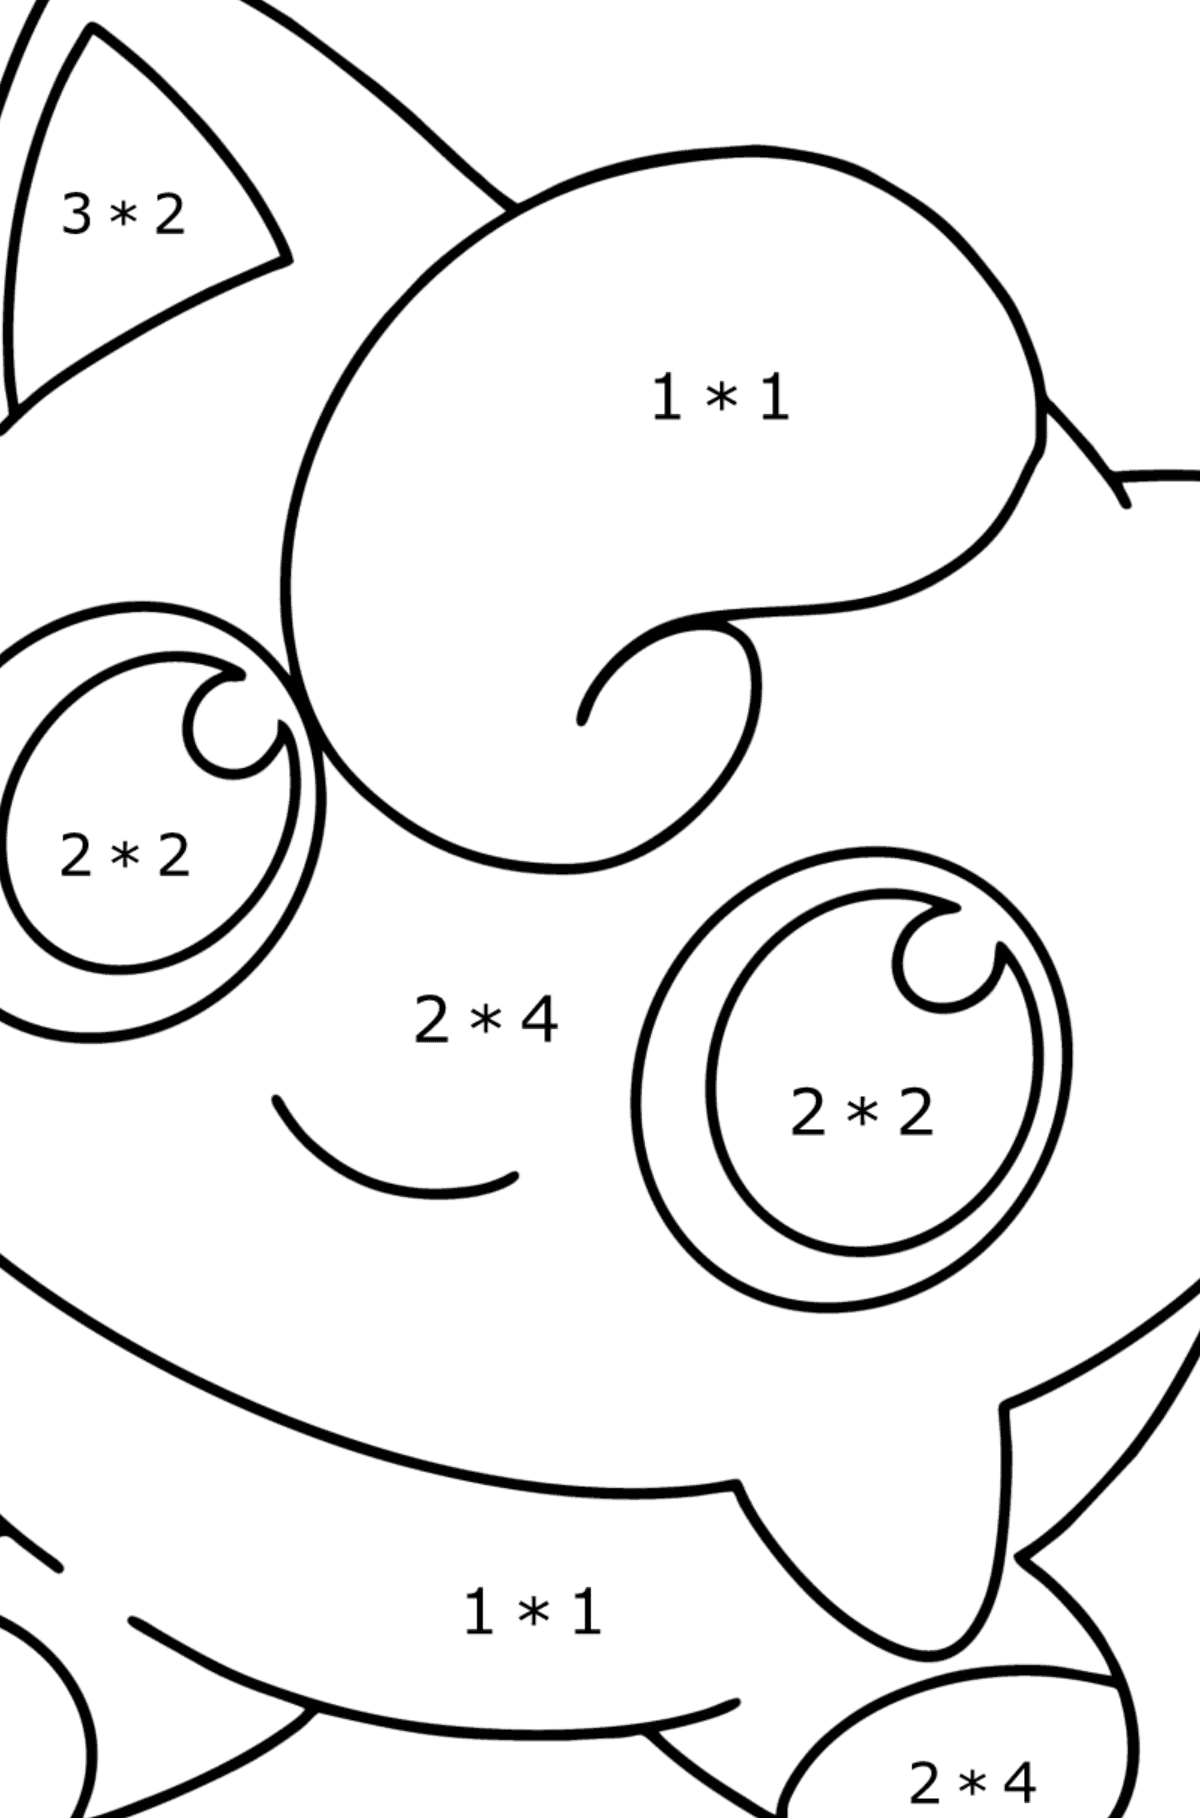 Coloring page Pokémon Go Jigglypuff - Math Coloring - Multiplication for Kids